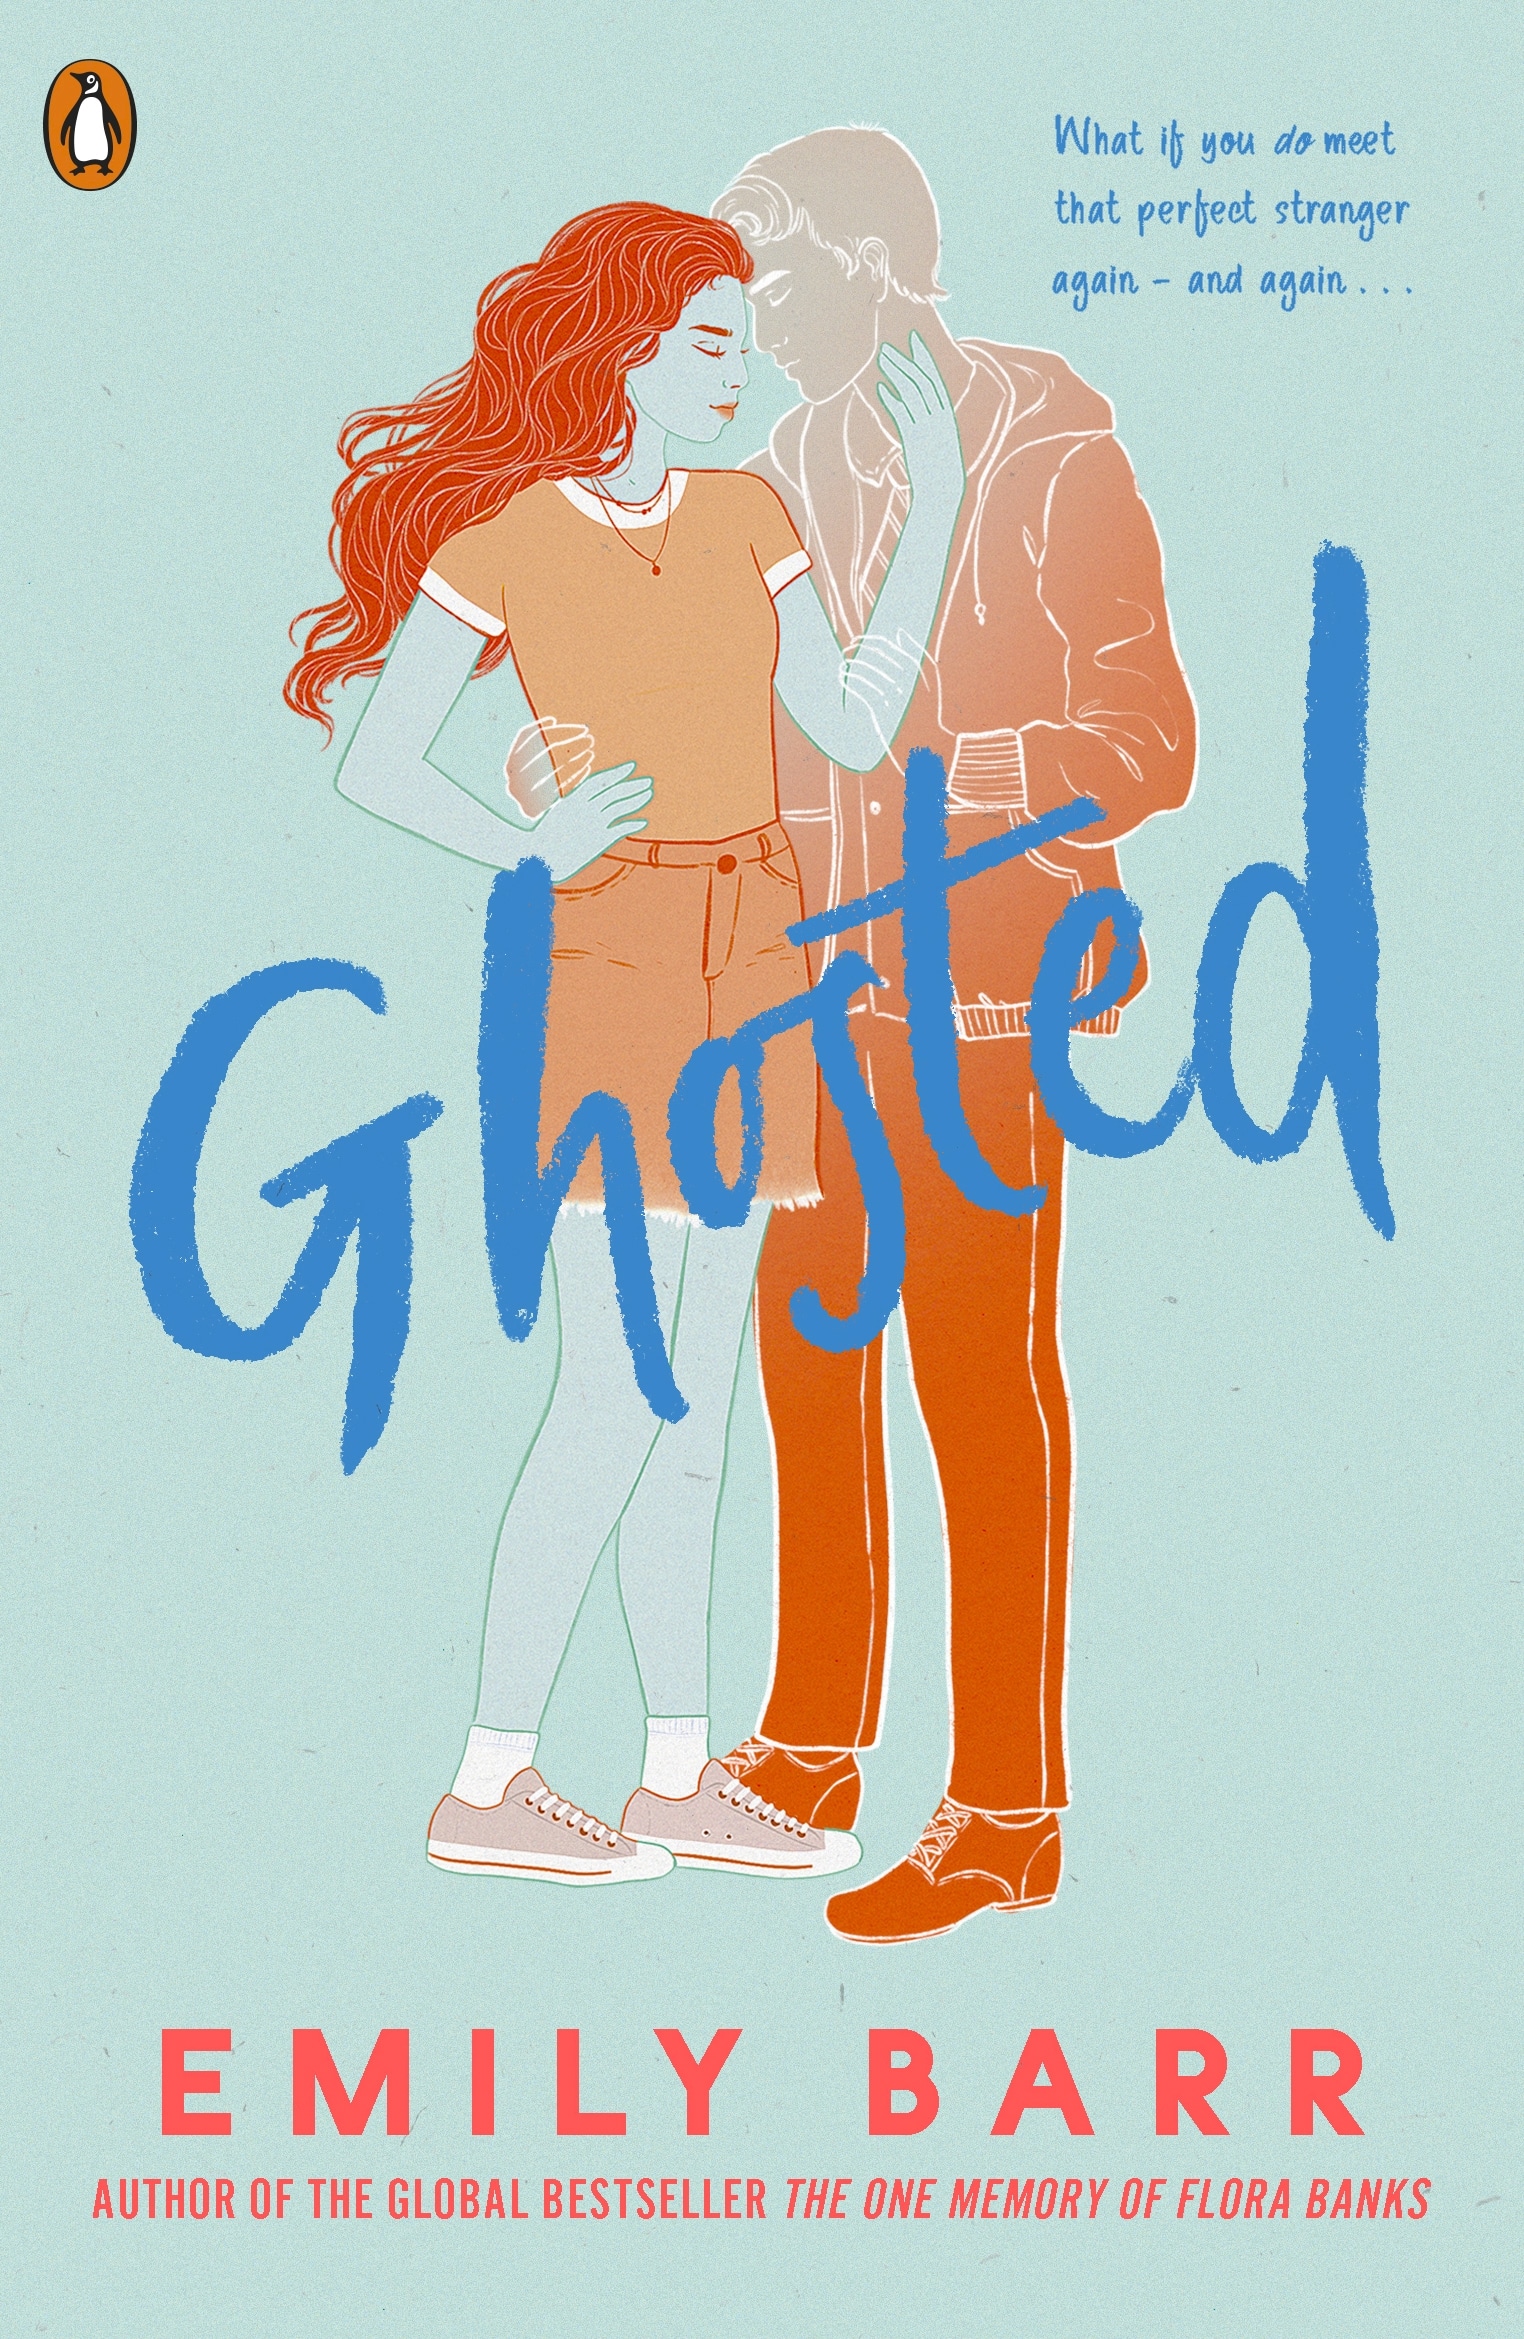 Book “Ghosted” by Emily Barr — May 12, 2022